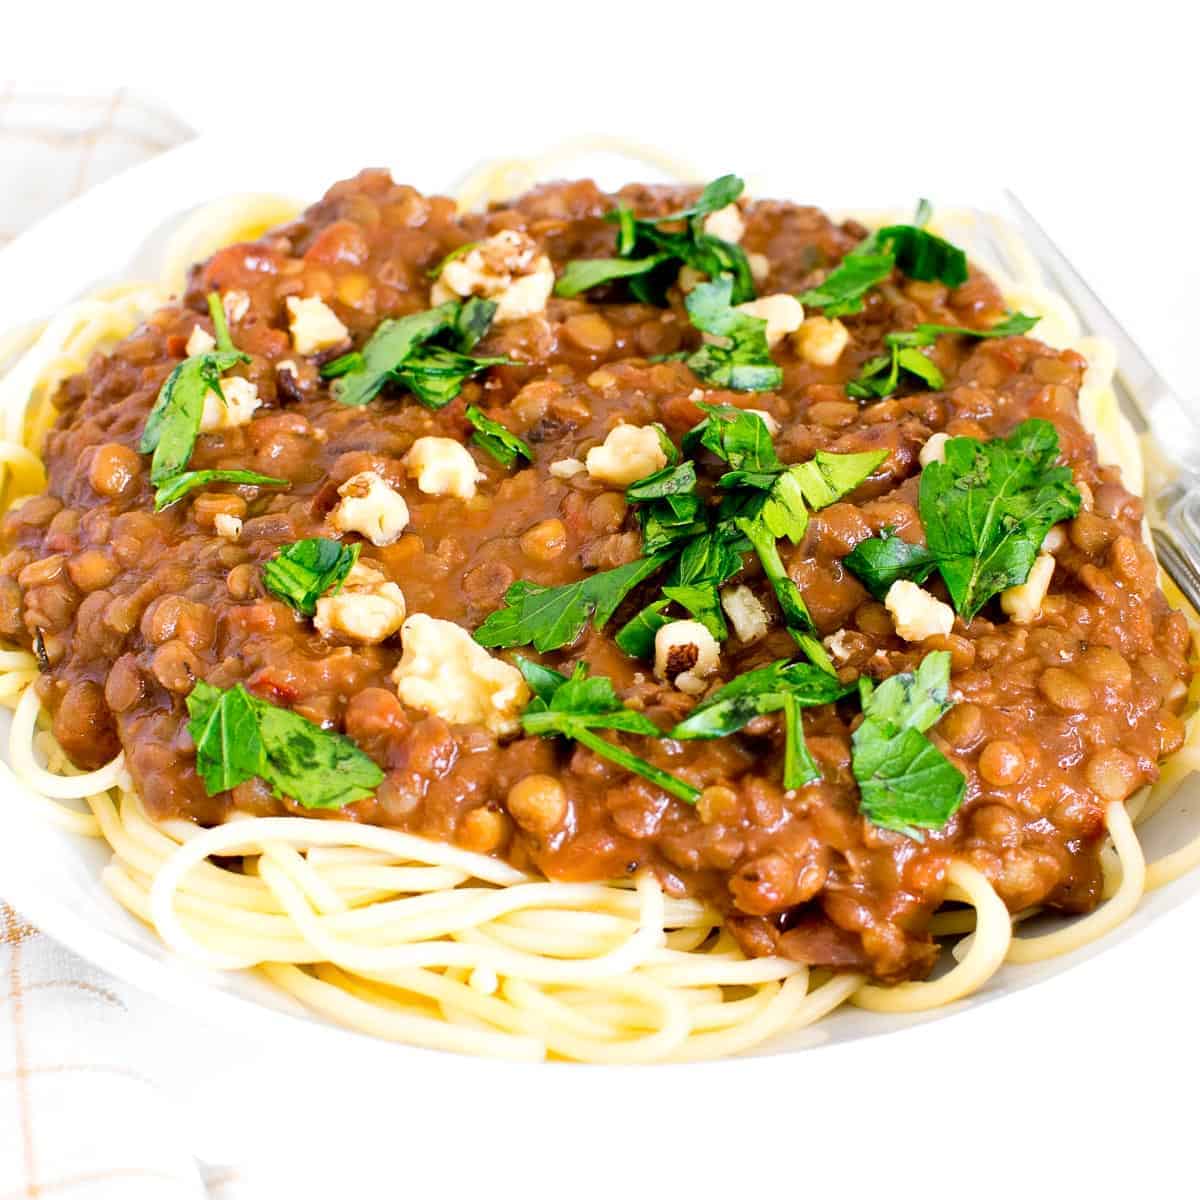 A plate of lentil bolognese served over spaghetti and topped with fresh herbs.